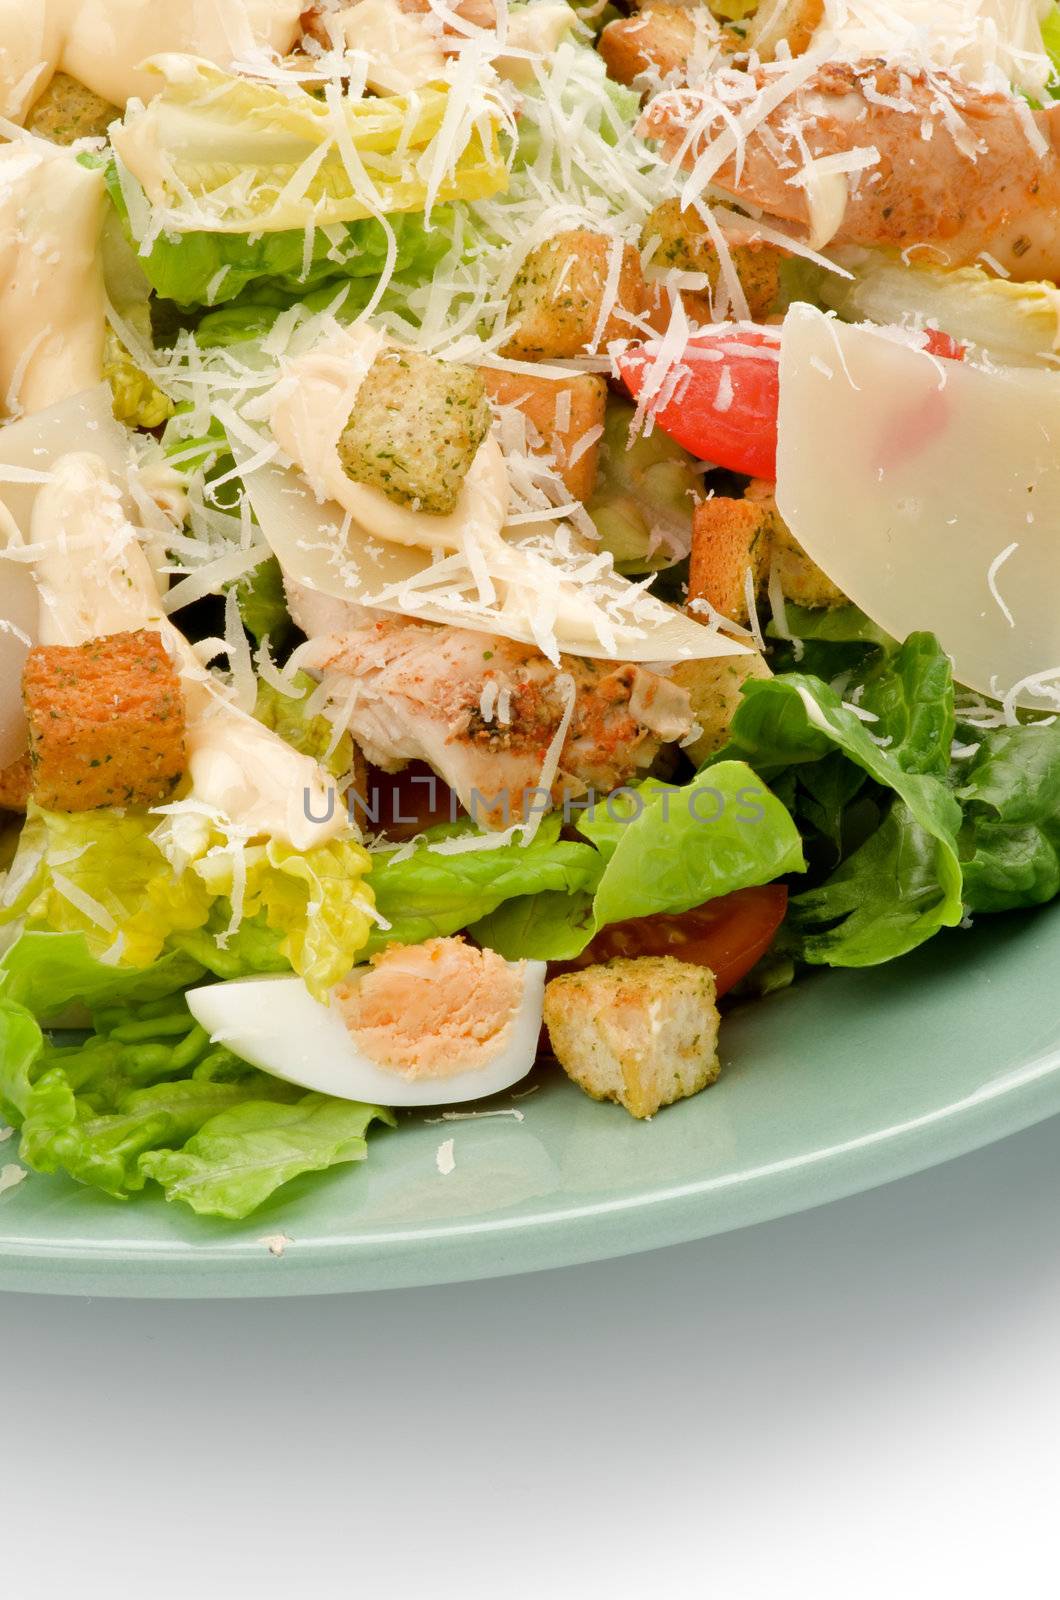 Caesar Salad with Grilled Chicken Breast, Garlic Crouton, Romaine Lettuce, Cherry Tomato, Eggs, Sauce and Grated Parmesan Cheese closeup on Green Plate